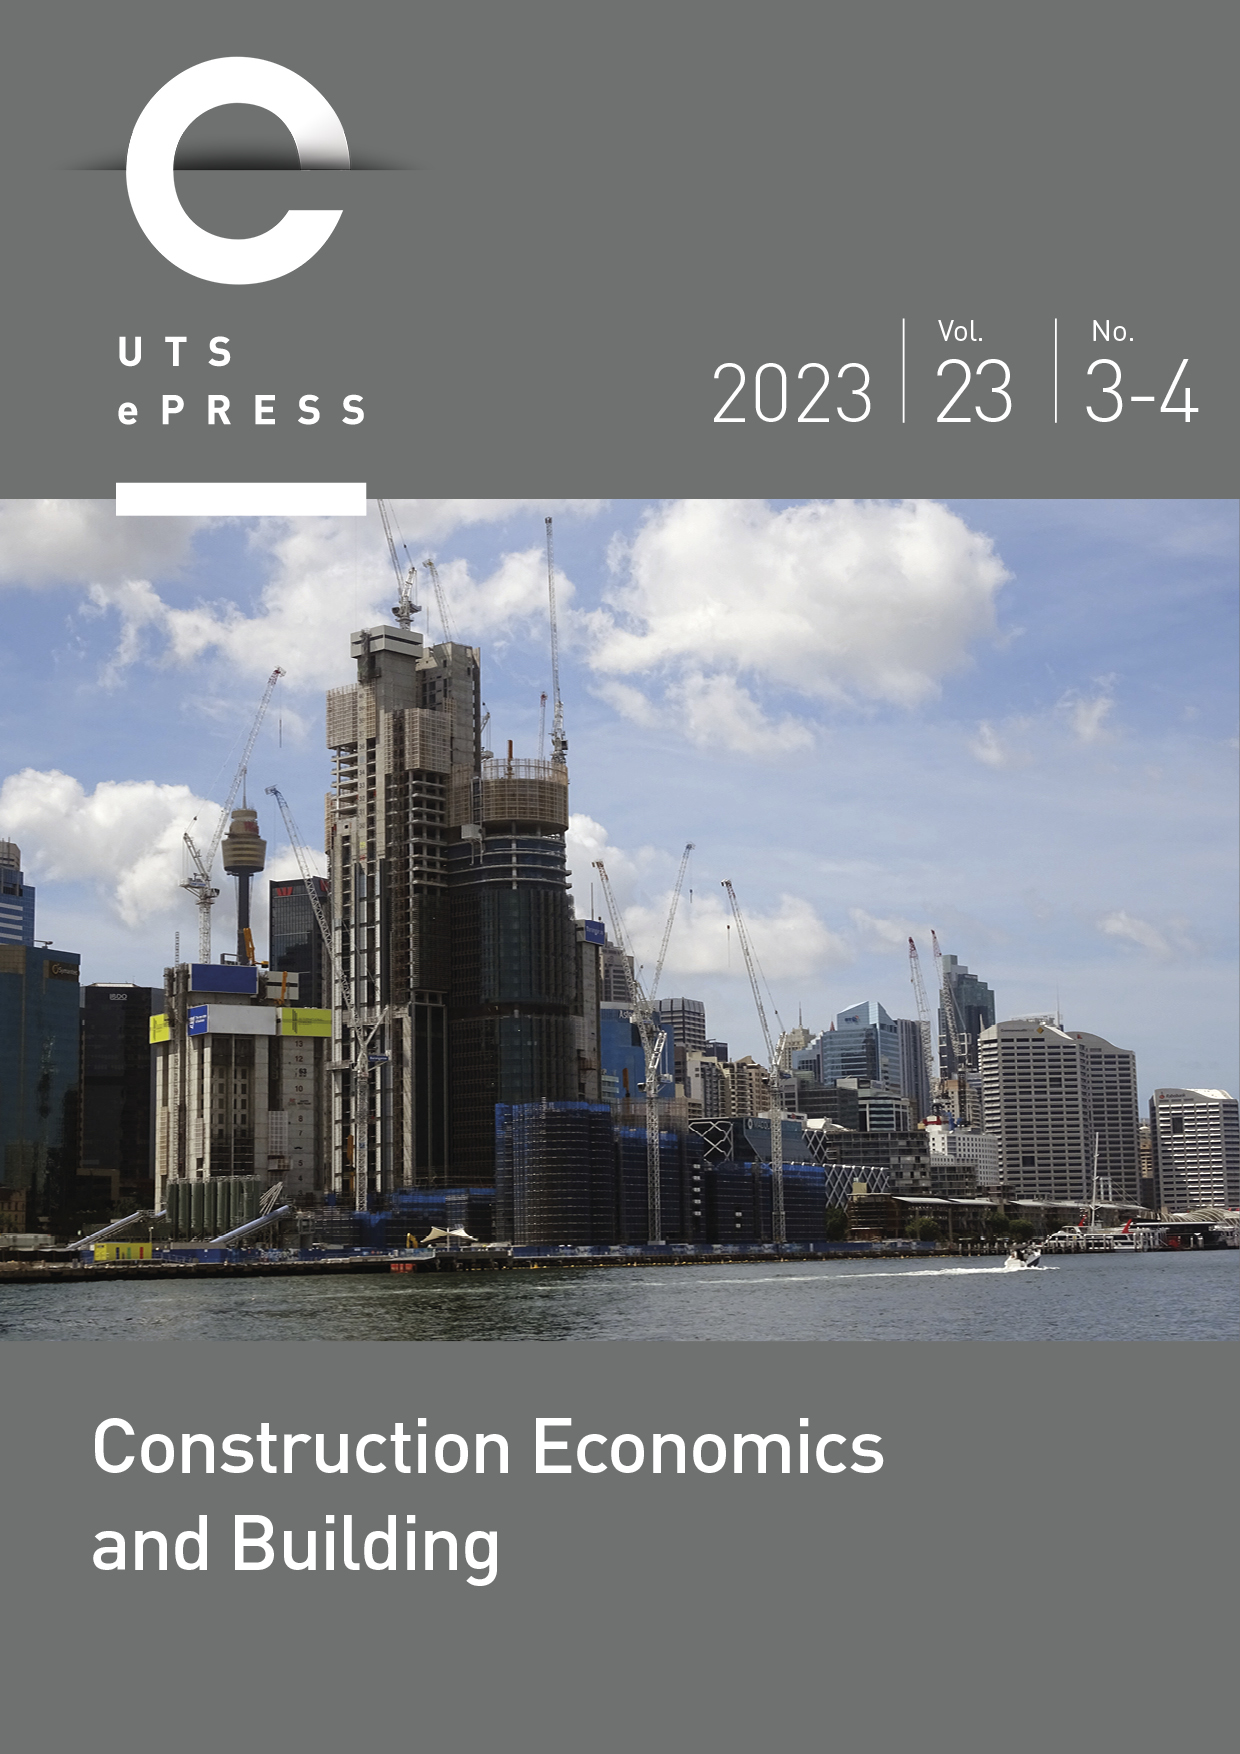 "Construction Economics and Building" 2022 Volume 22 Number 4 cover